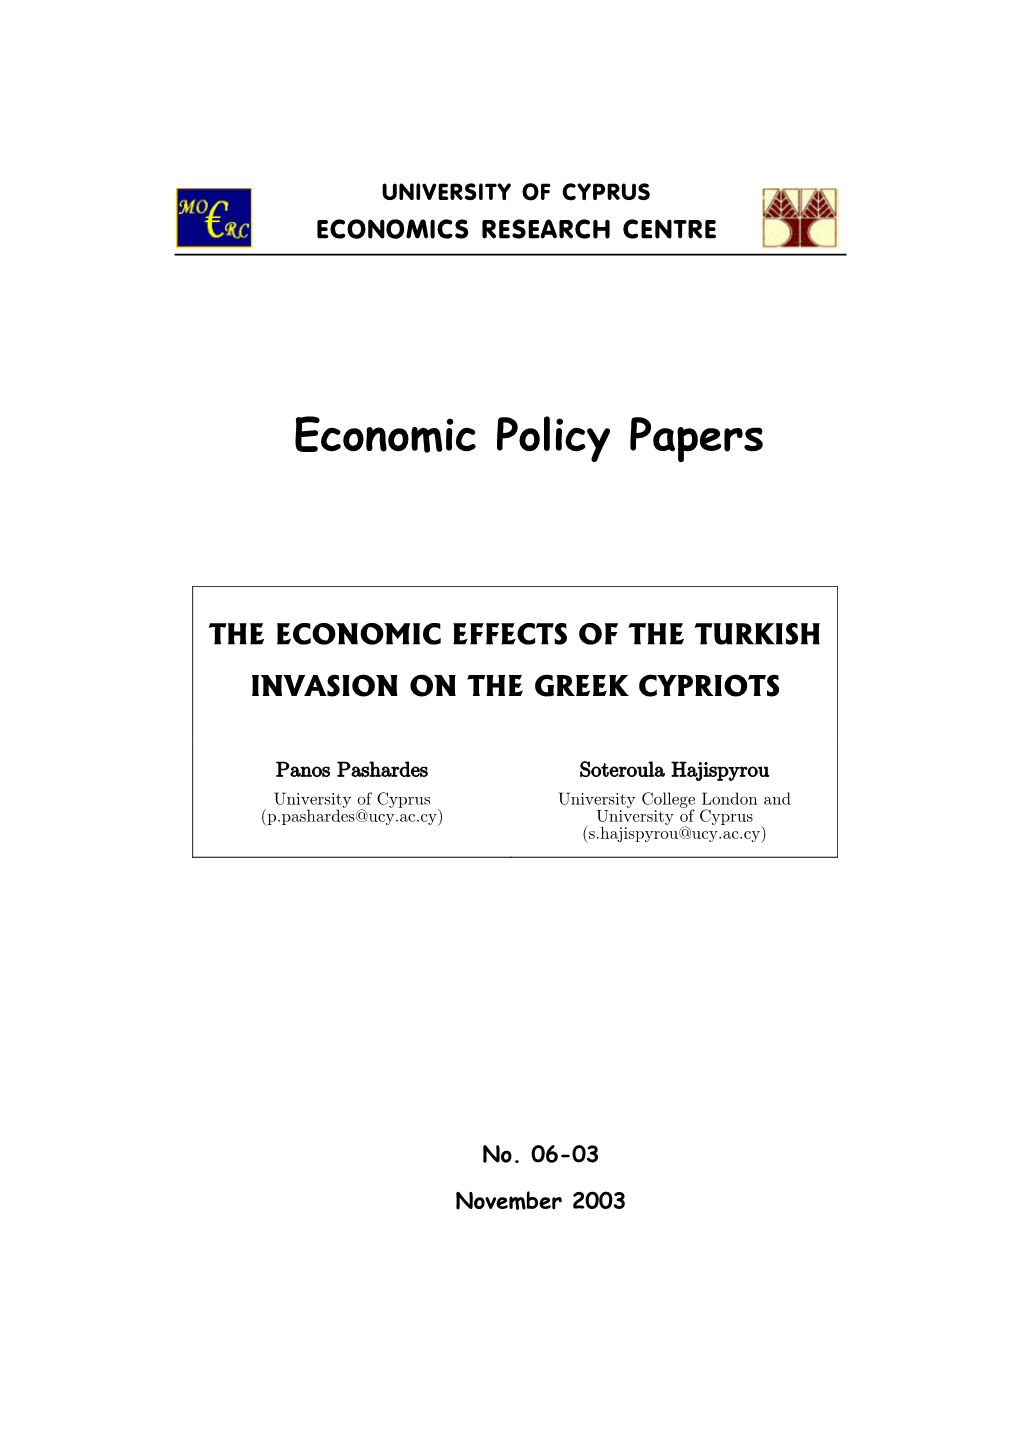 The Economic Effects of the Turkish Invasion on the Greek Cypriots